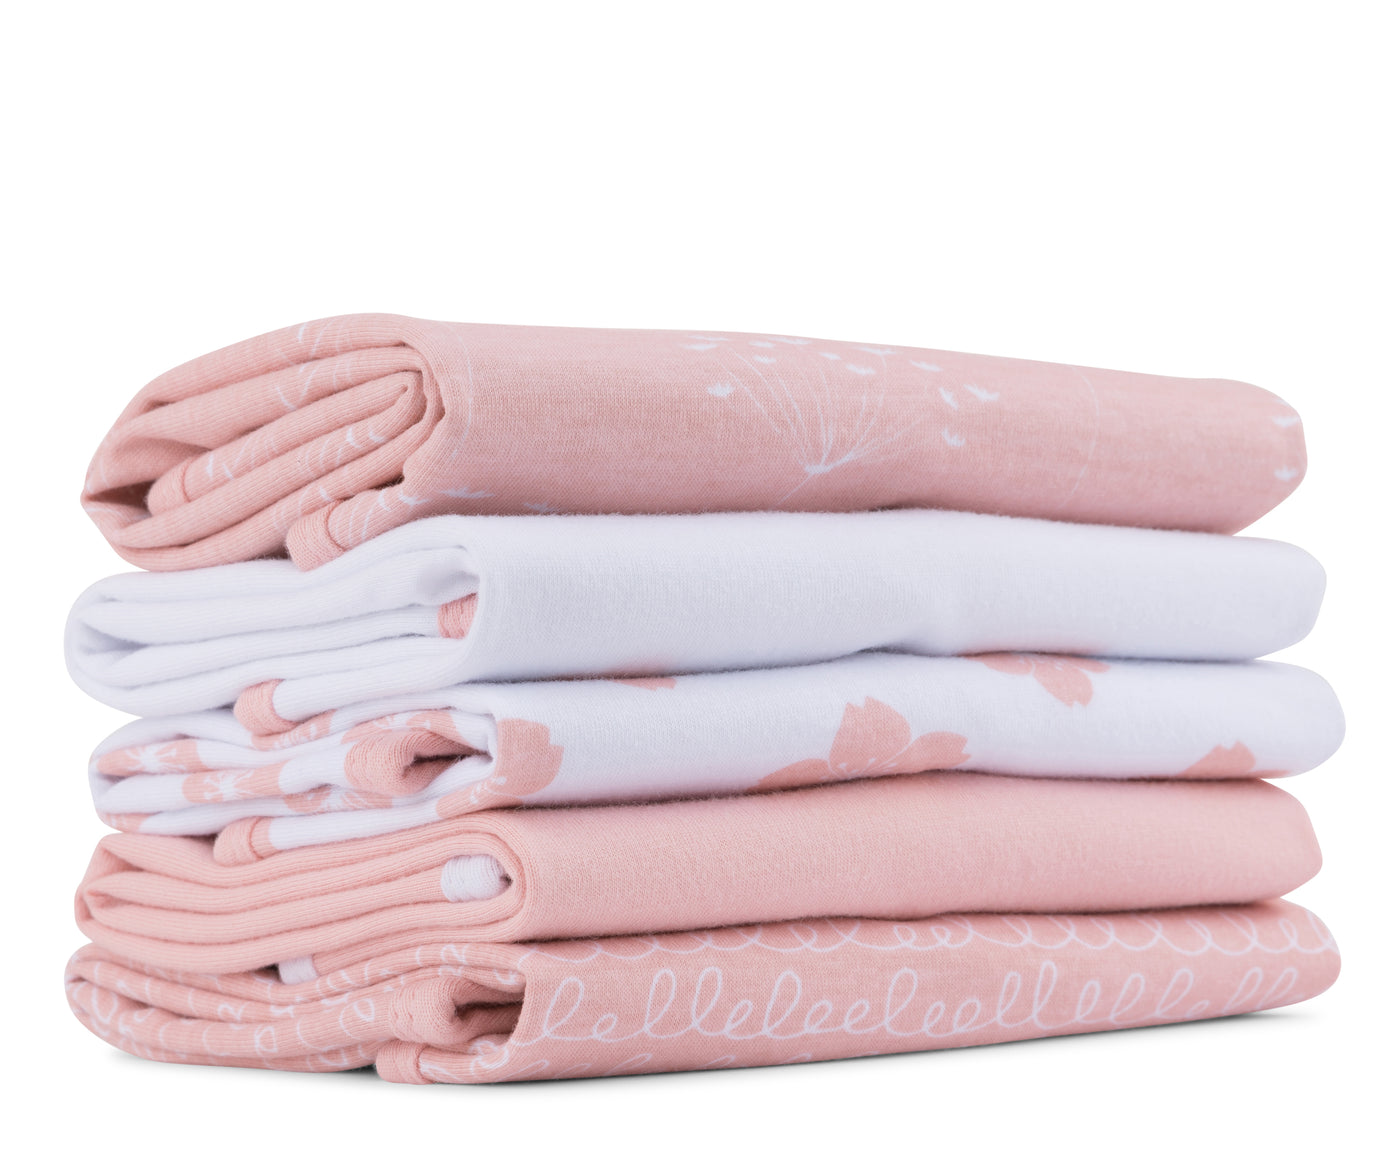 Ely's & Co. Waterproof Square Burp Cloth Five Pack - Pink Collection